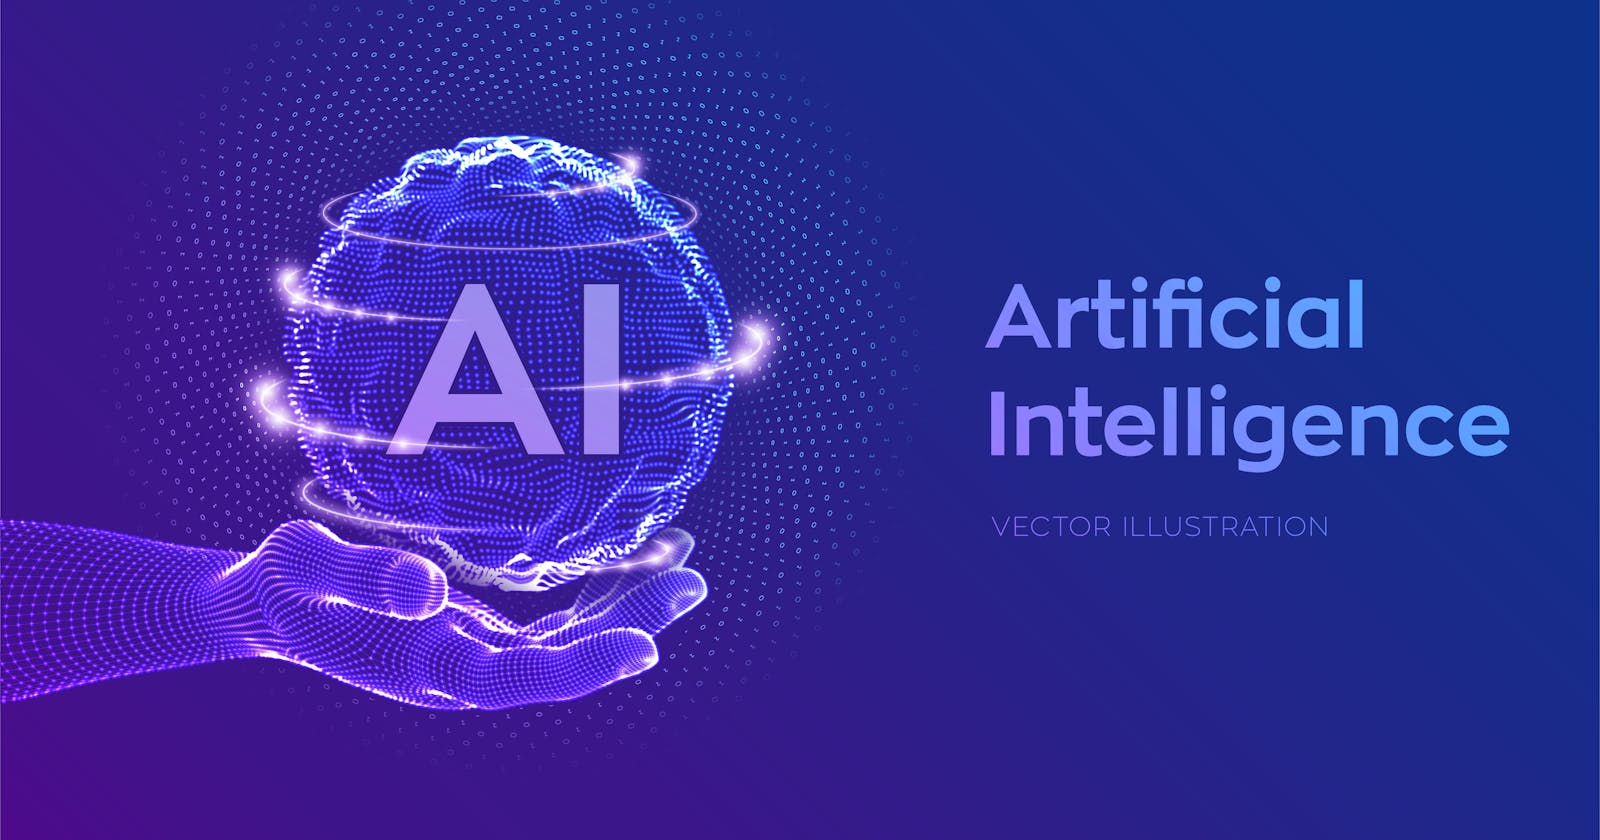 #1: Why do we really need Artificial Intelligence (AI) ?